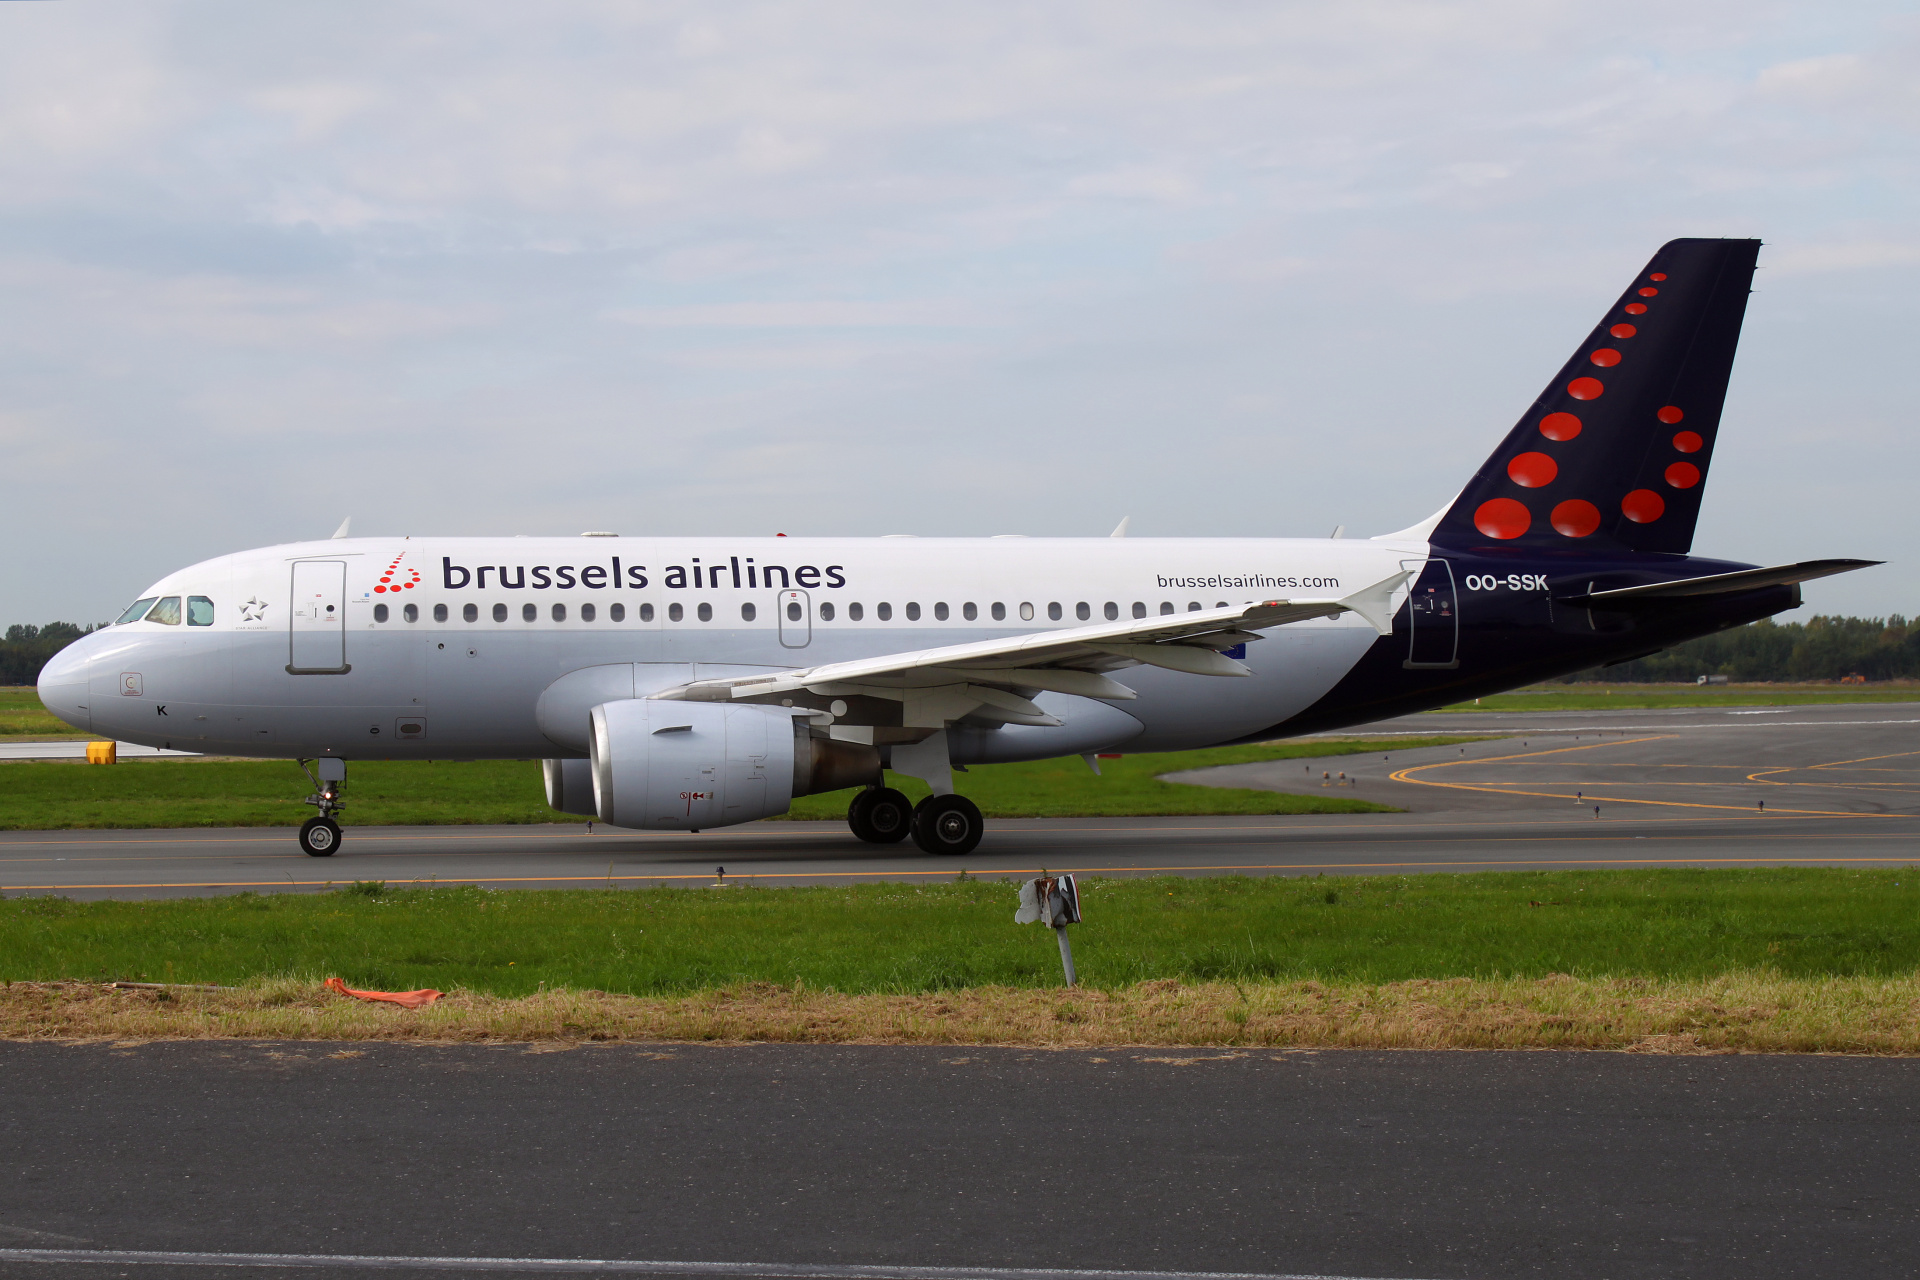 OO-SSK (Samoloty » Spotting na EPWA » Airbus A319-100 » Brussels Airlines)